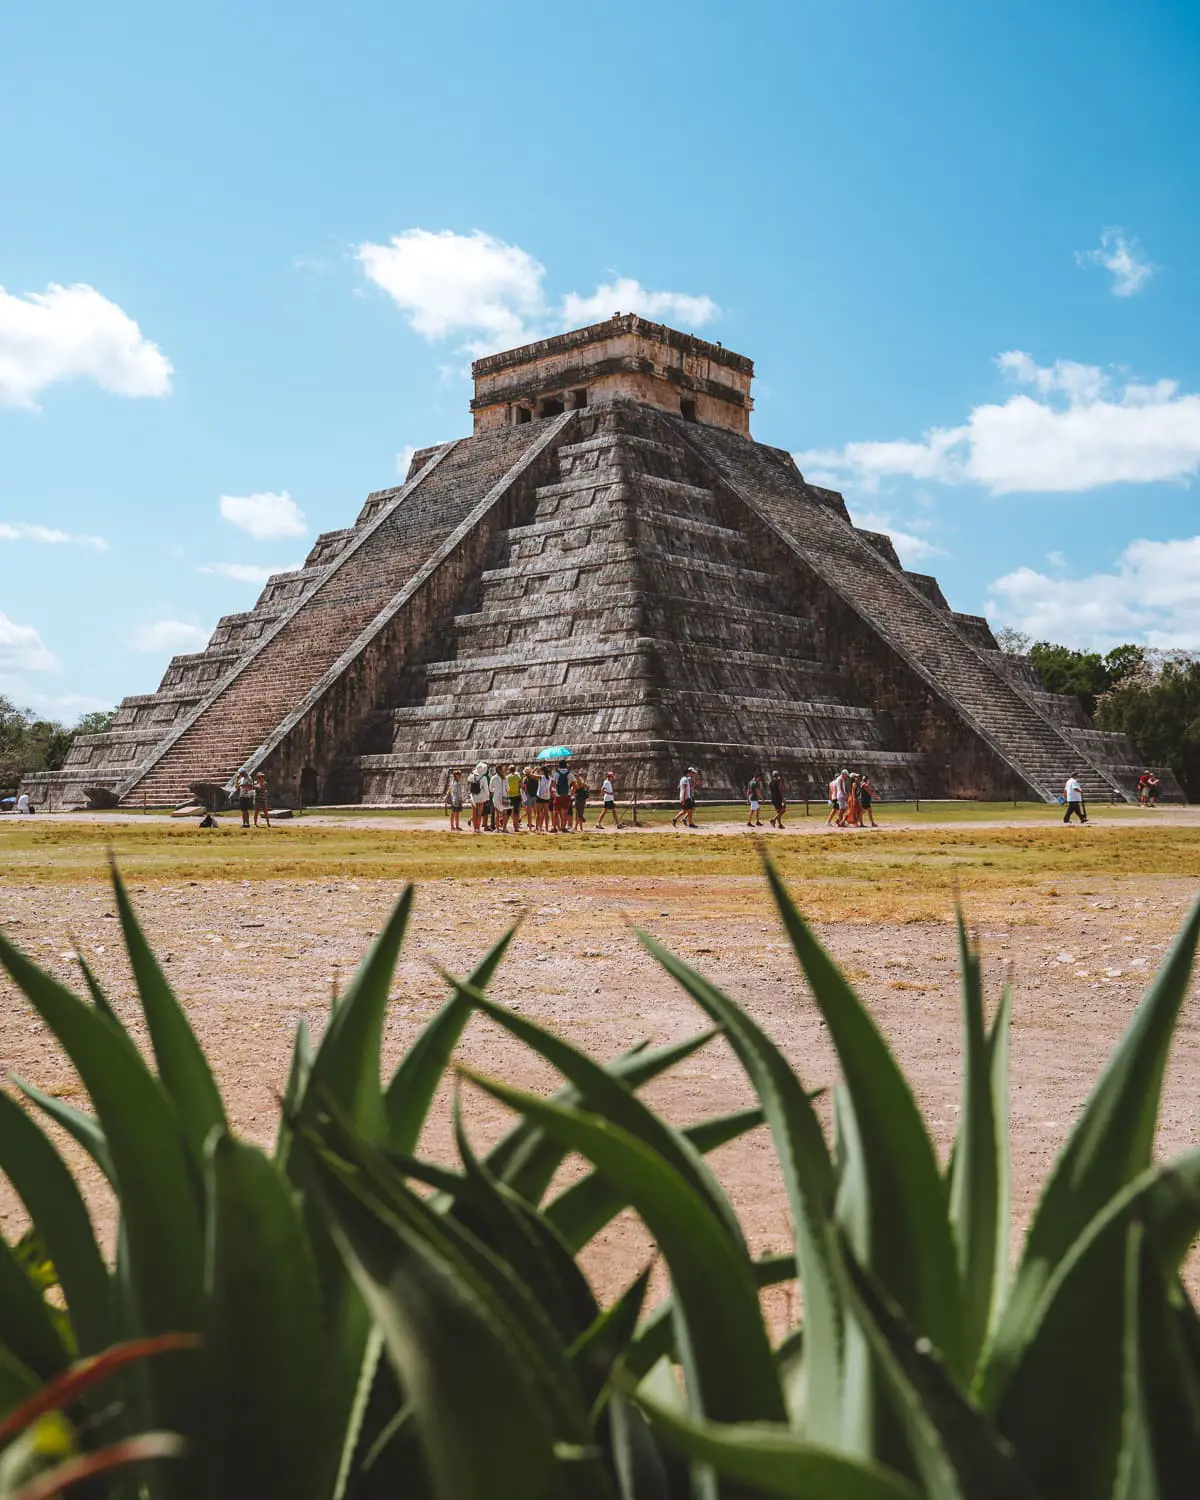 El Castillo is the most famous structure on Chichén Itzá that represents the architecture of the Mayans